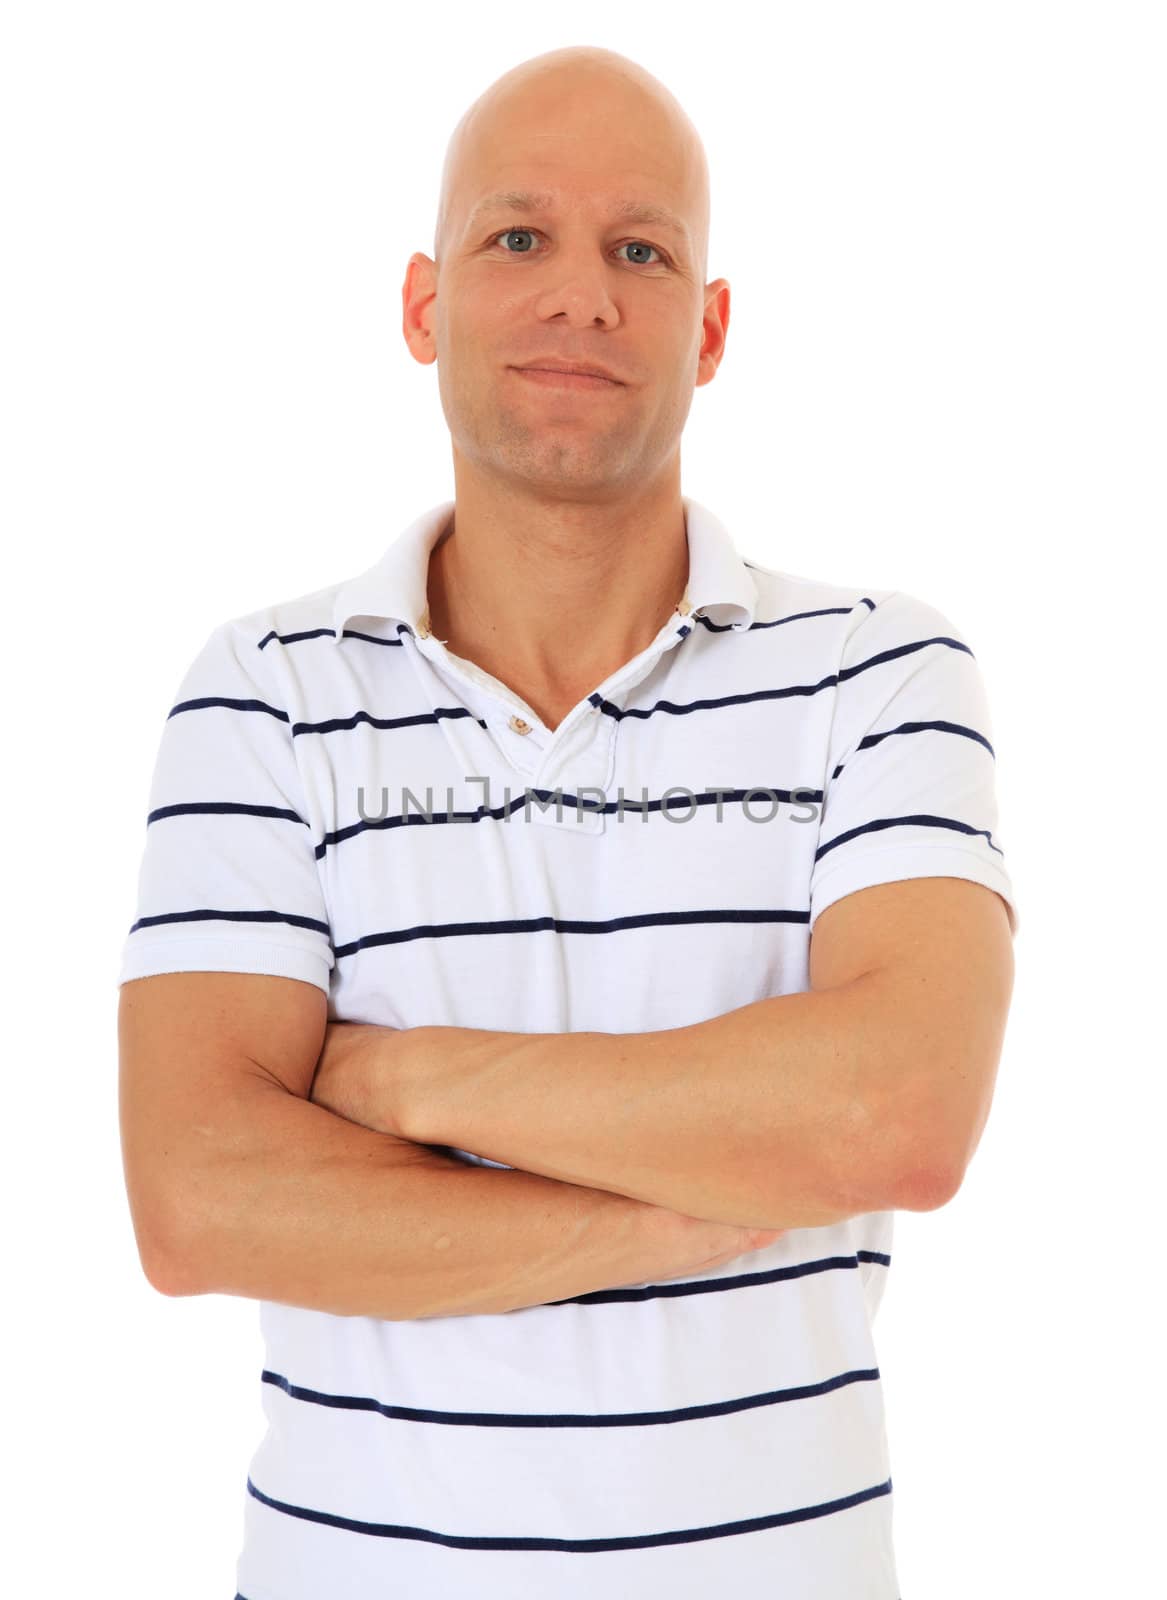 Confident middle age man. All on white background.